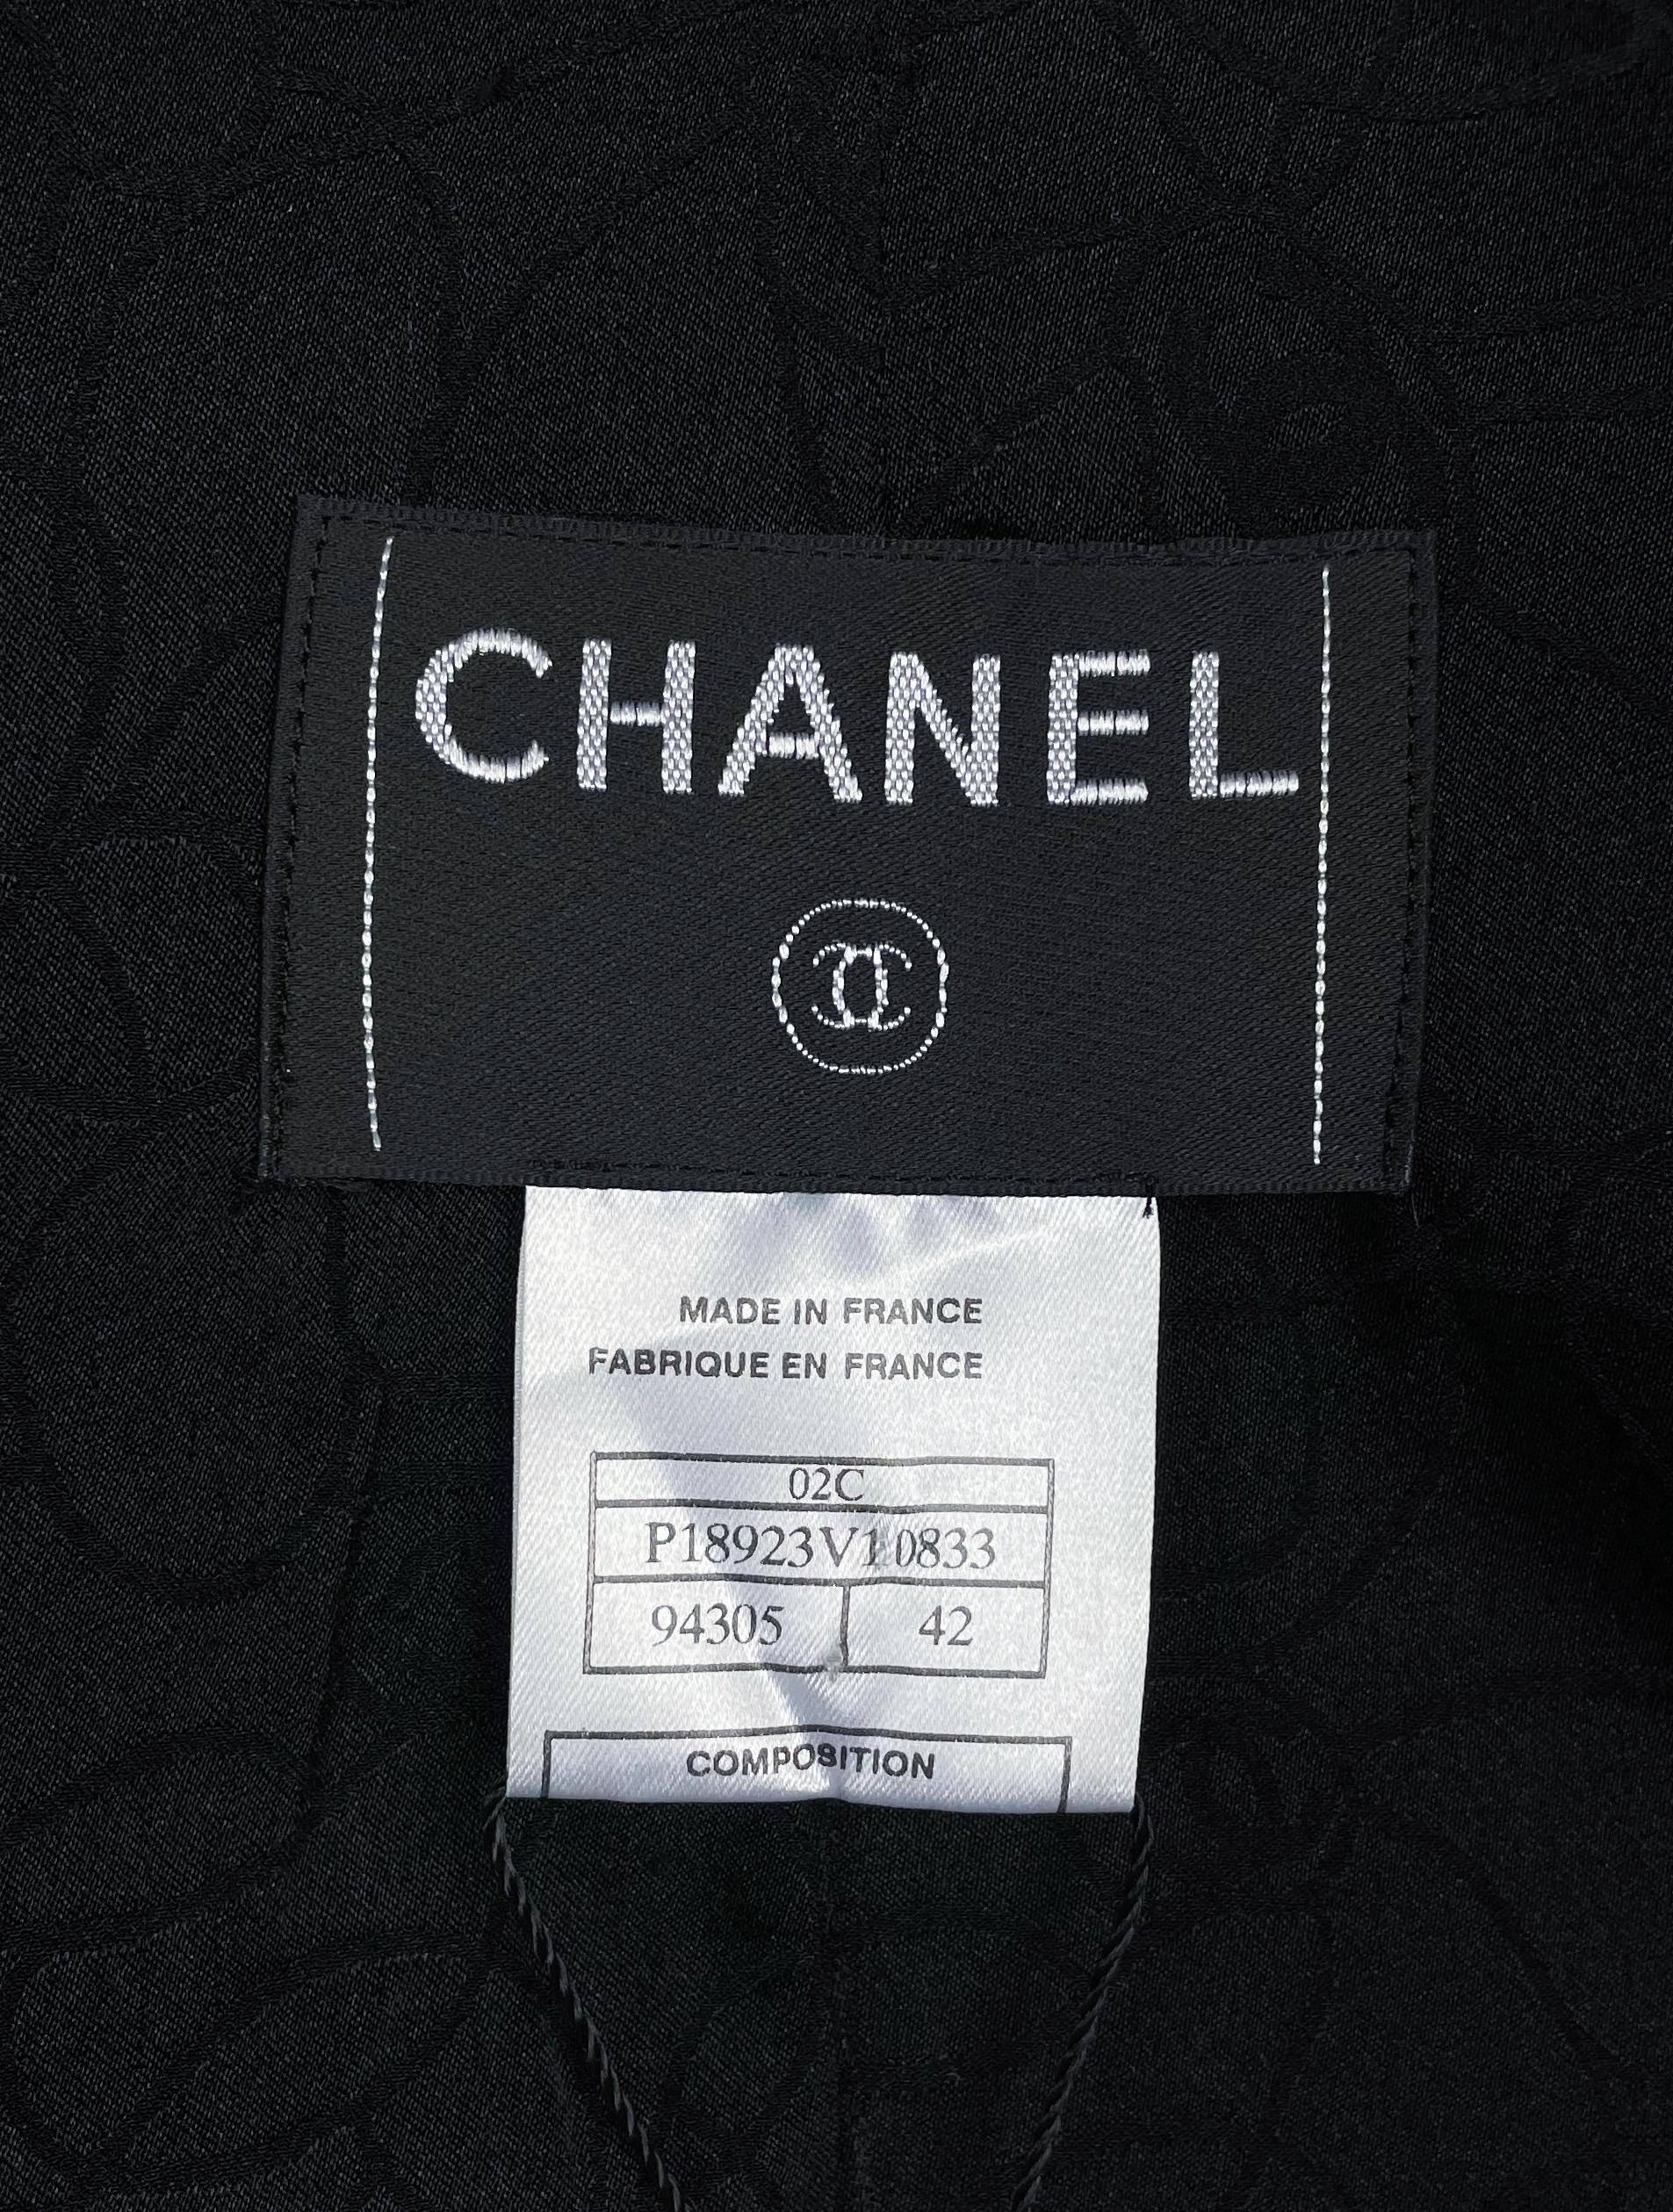 Women's Chanel Black Vintage Jacket, Cruise 2002 Collection